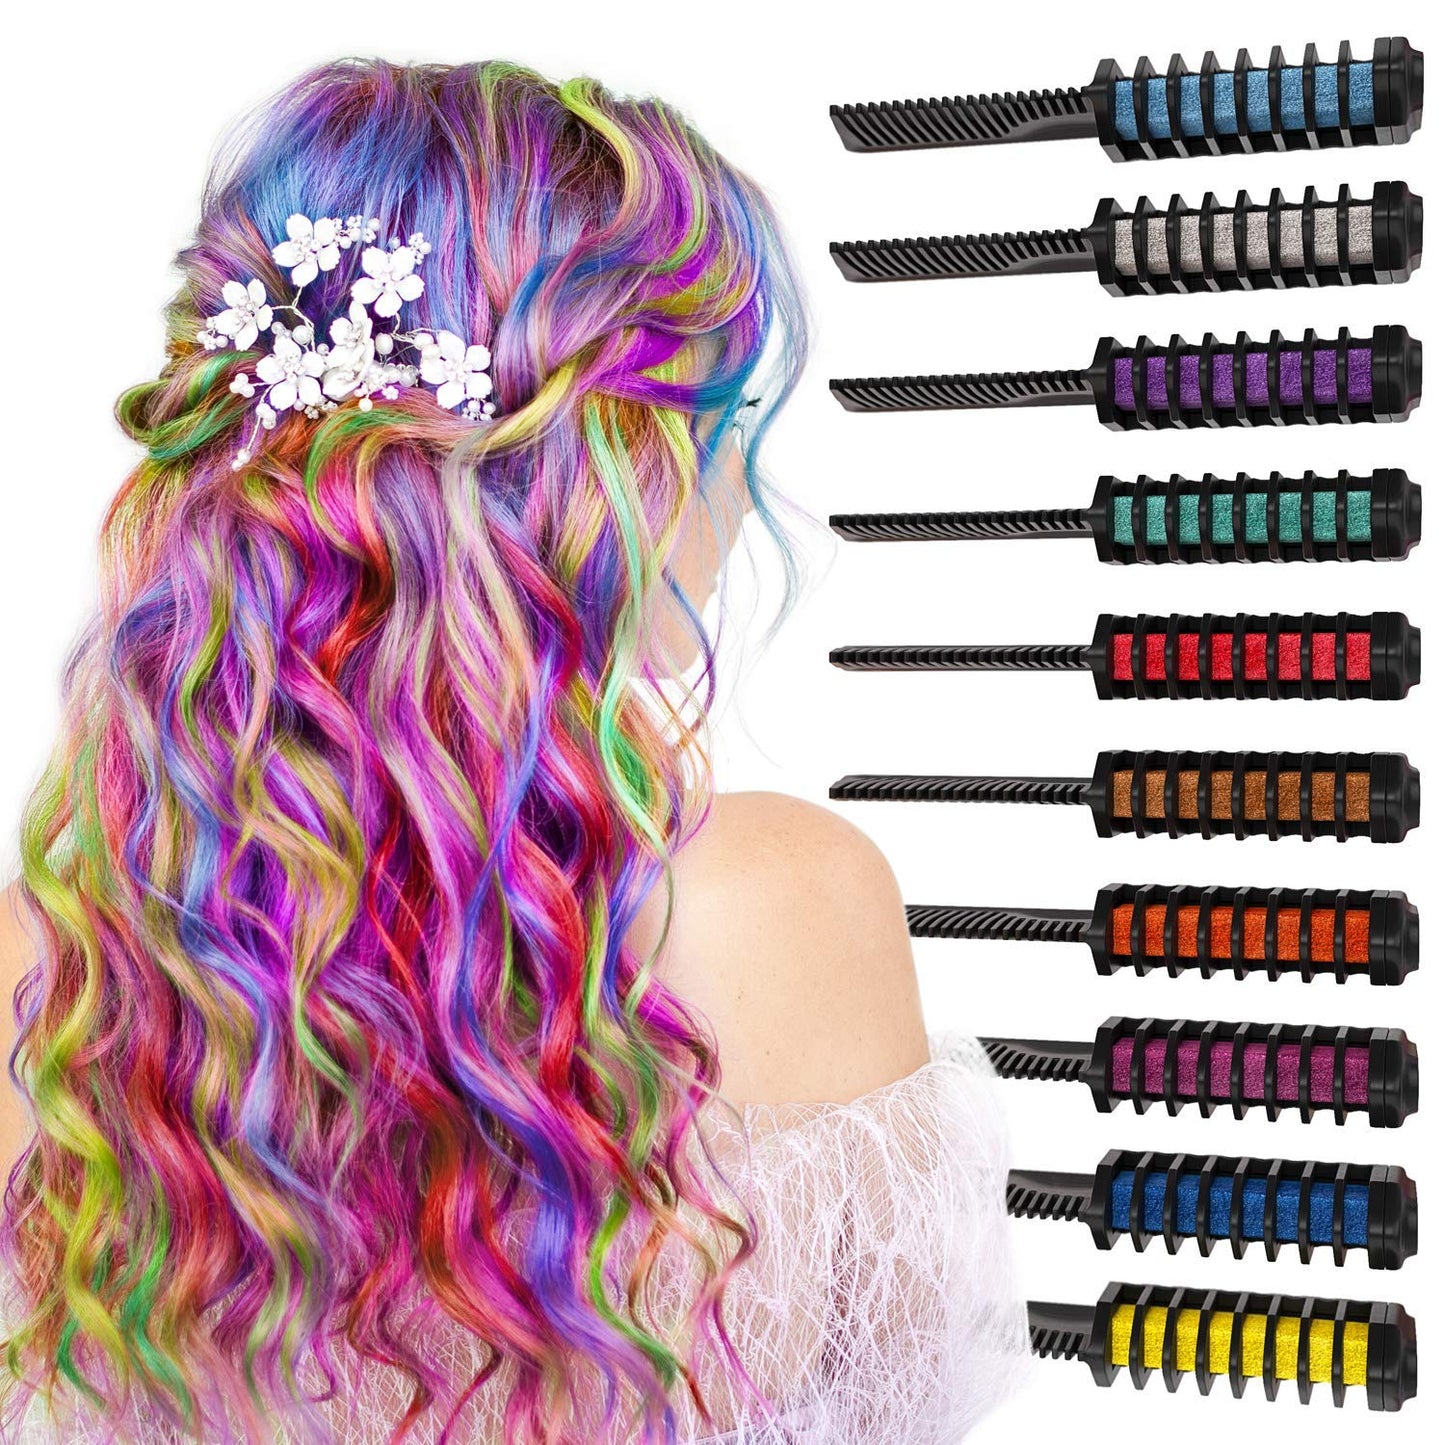 Arteza Hair Chalk Combs, Assorted Colors, set of 12